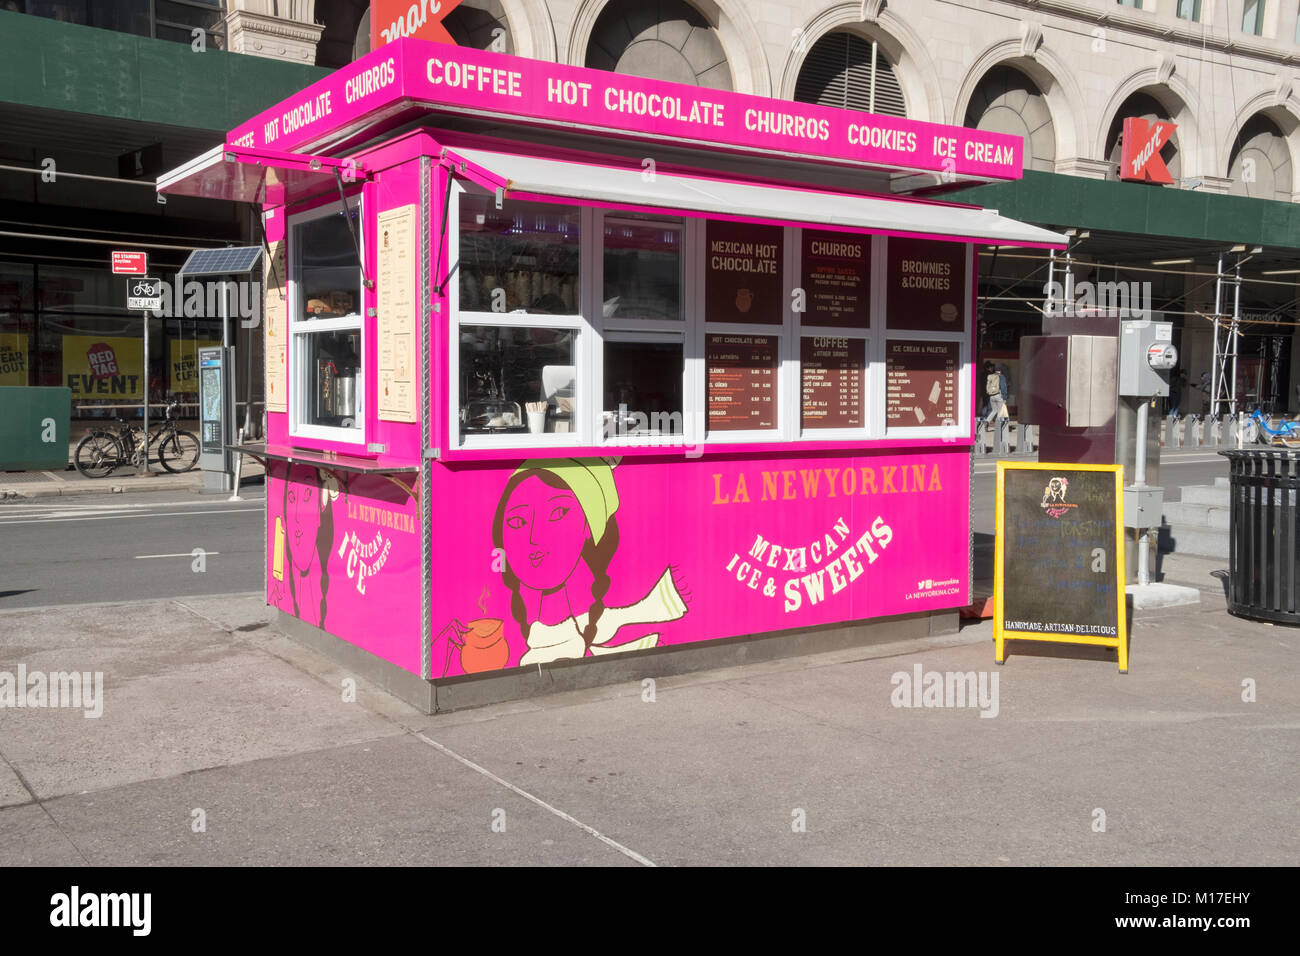 La Newyorkina, a colorful food kiosk on Astor Place in the East Village, New York City. Stock Photo